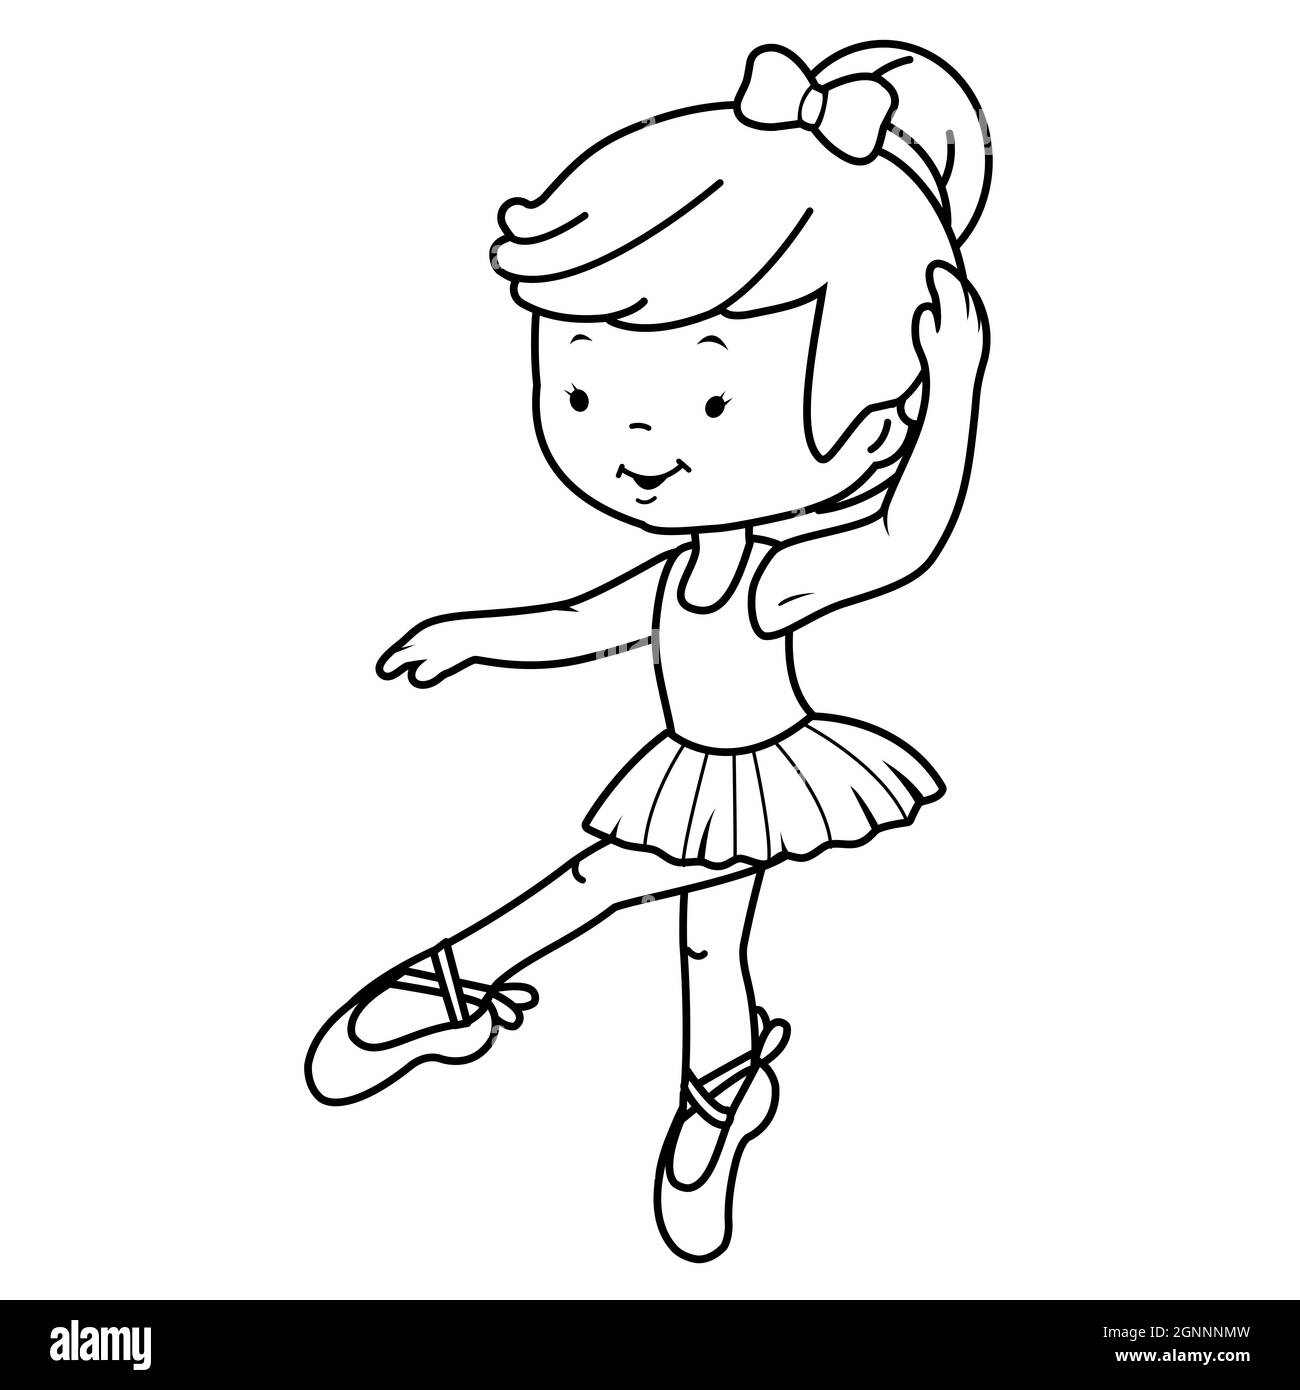 A cute ballerina dancer girl. Black and white coloring page. Stock Photo